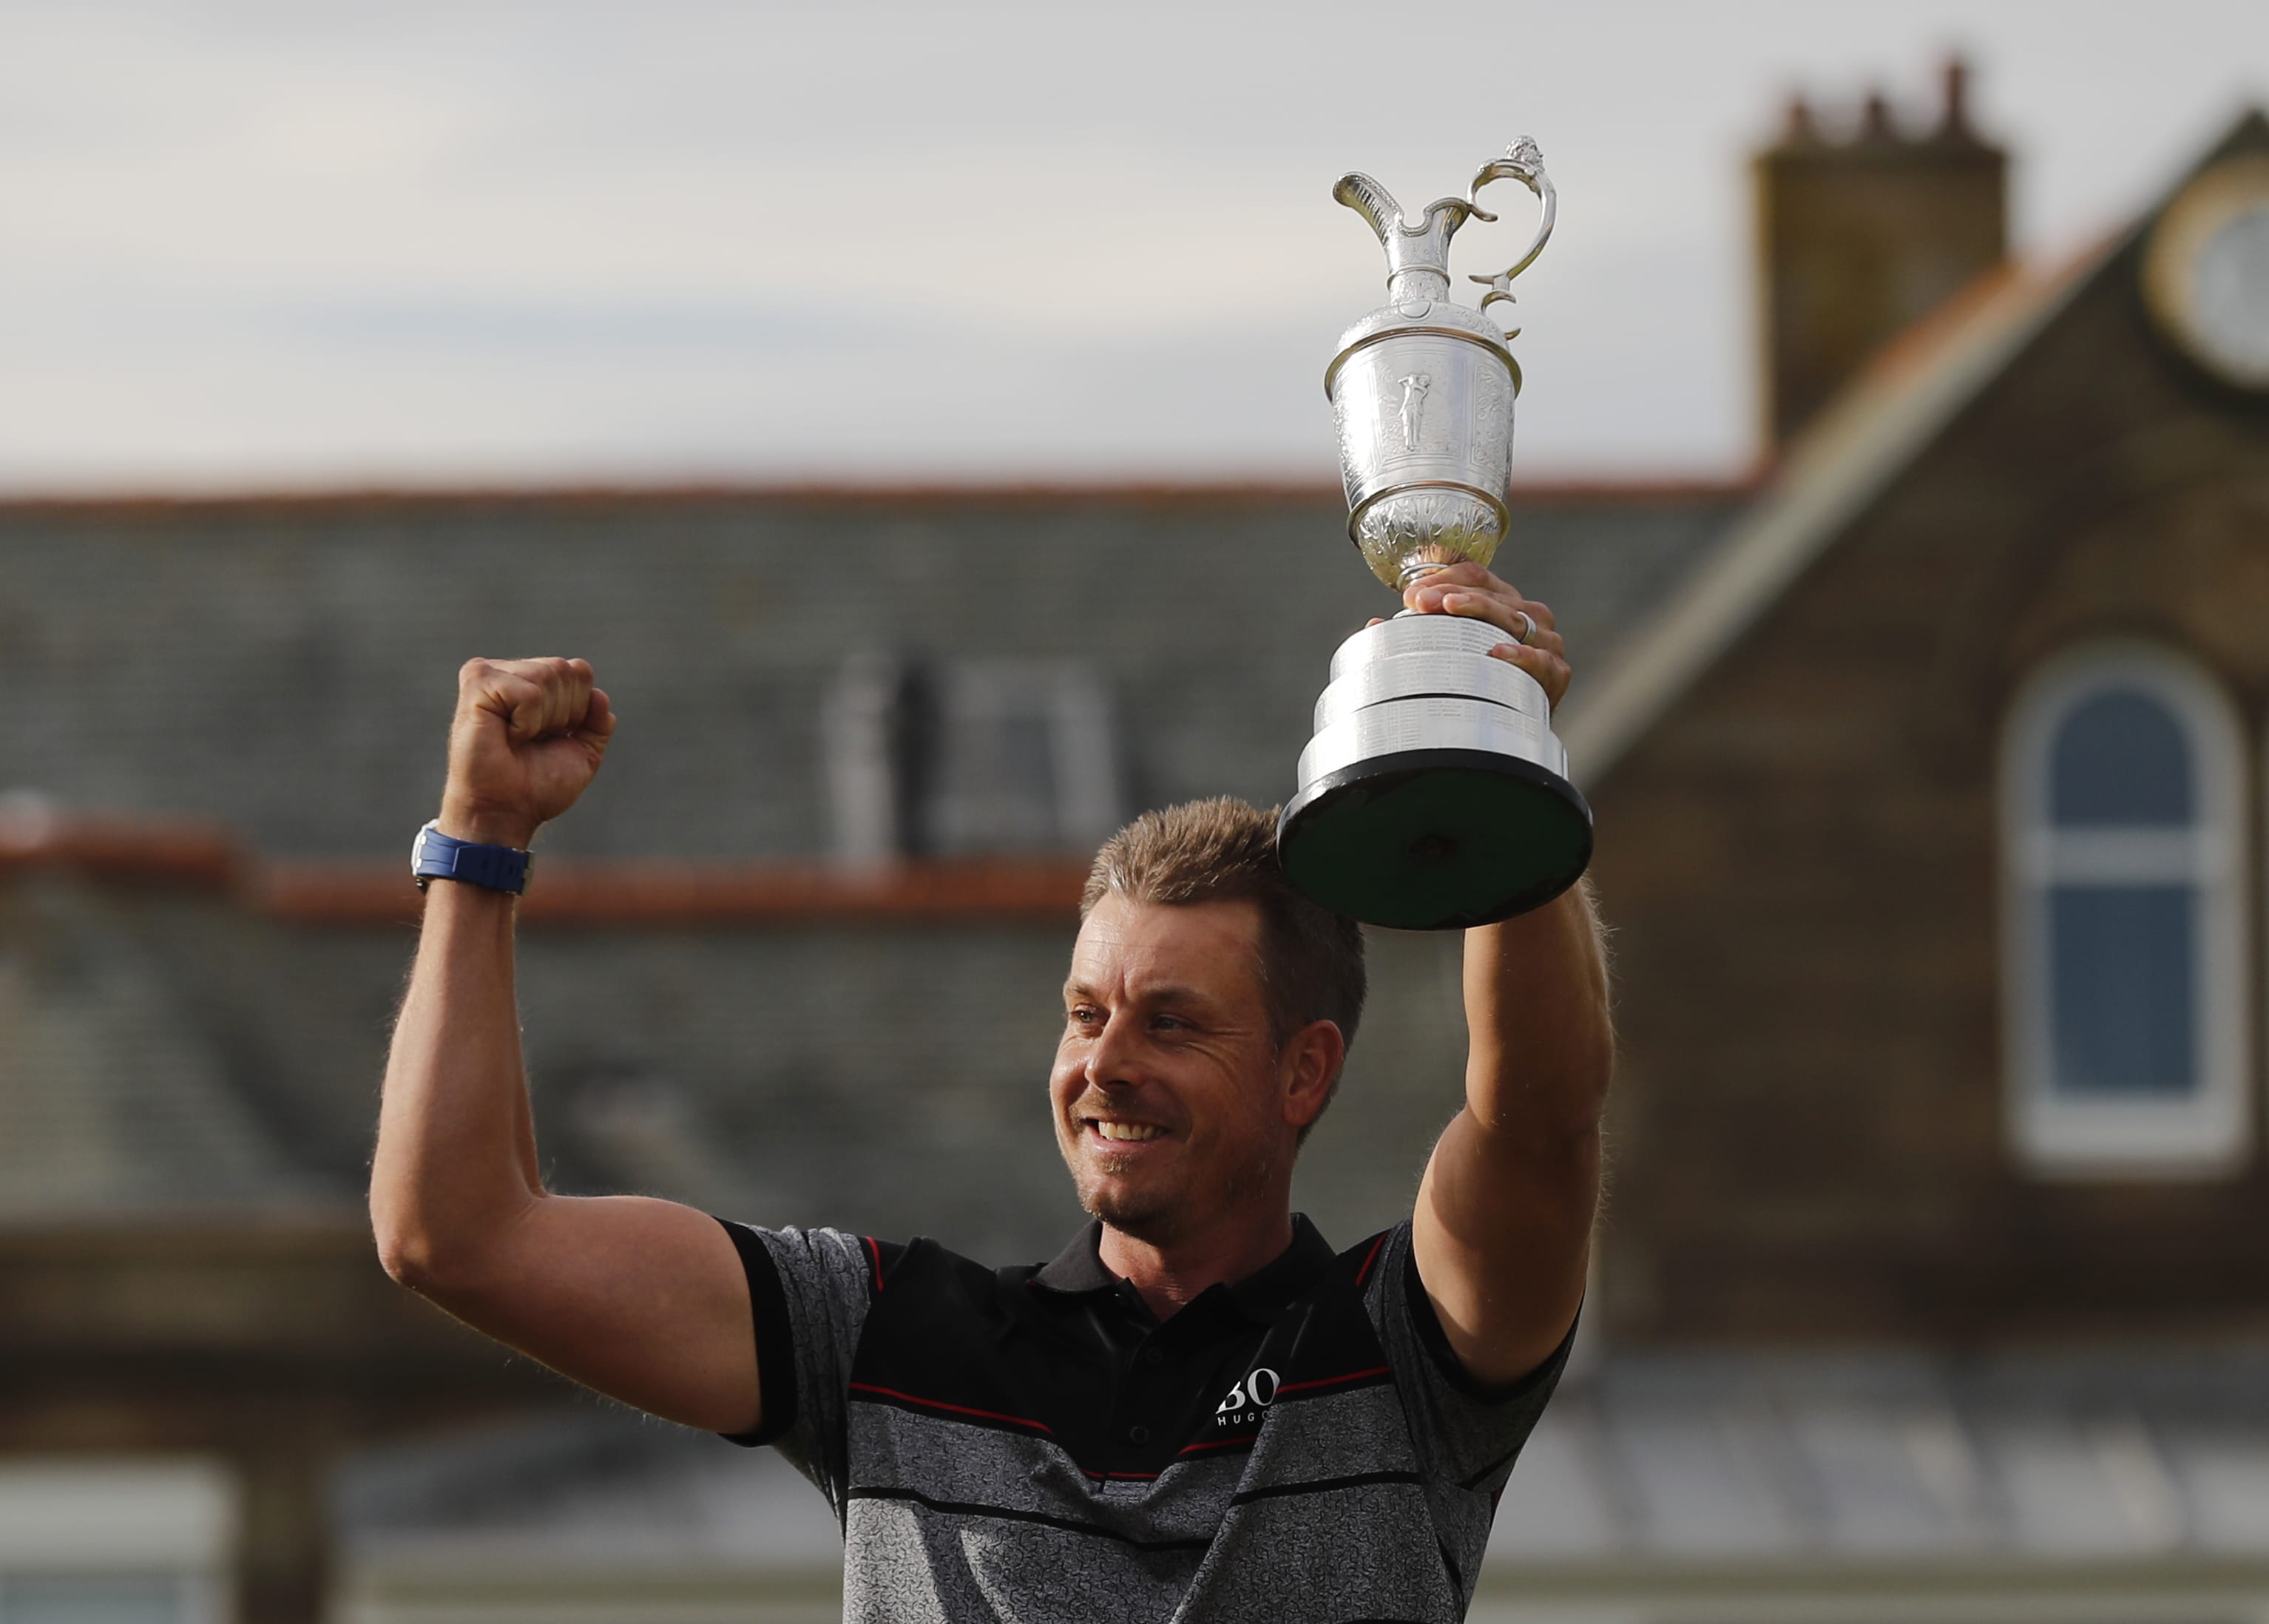 Henrik Stenson of Sweden poses with the trophy after winning the British Open Golf Championships at the Royal Troon Golf Club in Troon, Scotland, Sunday, July 17, 2016.